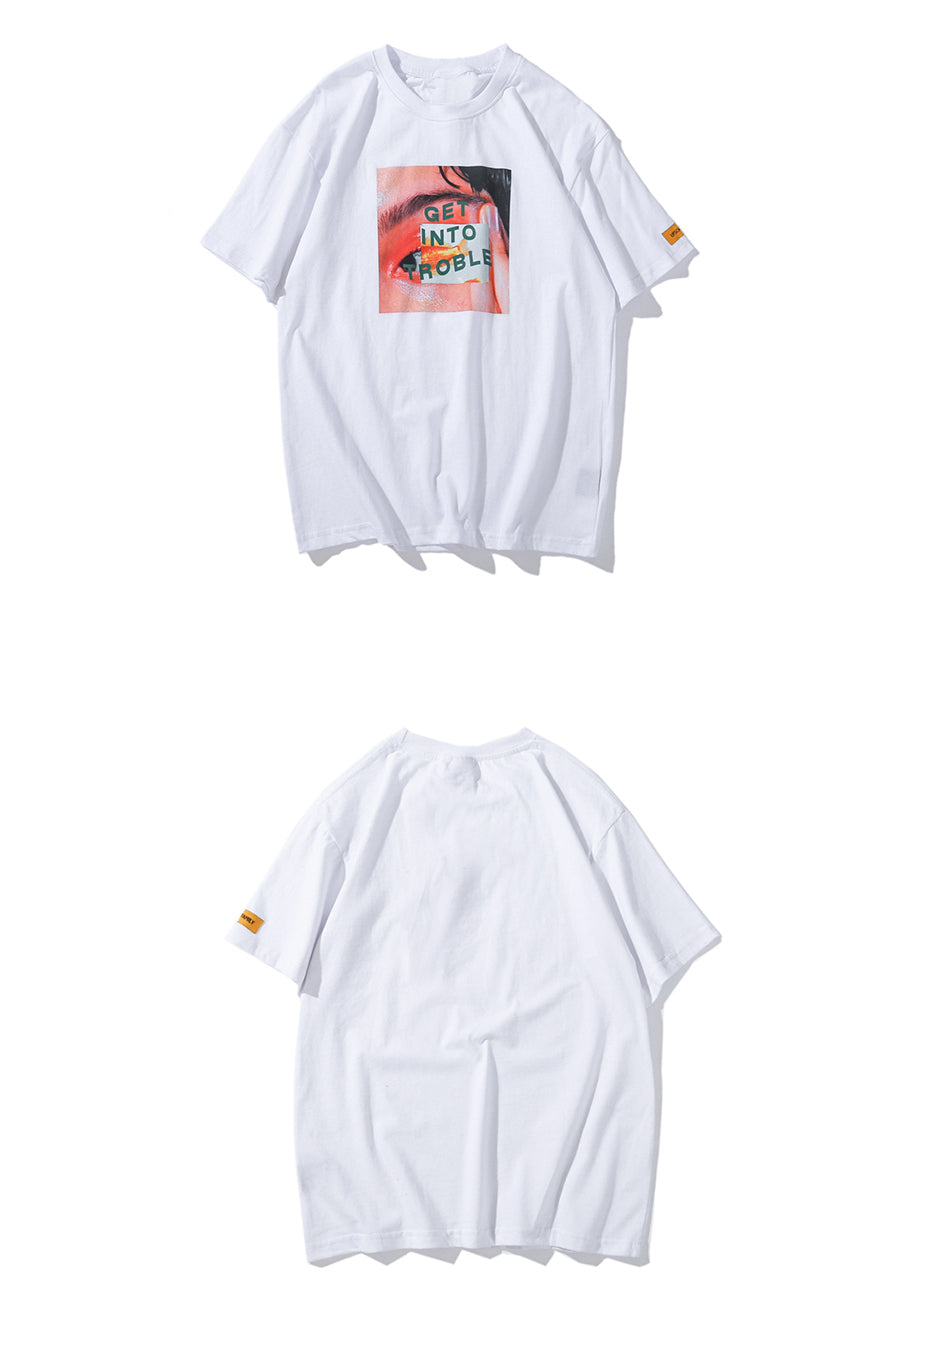 Troubled One Tee - White